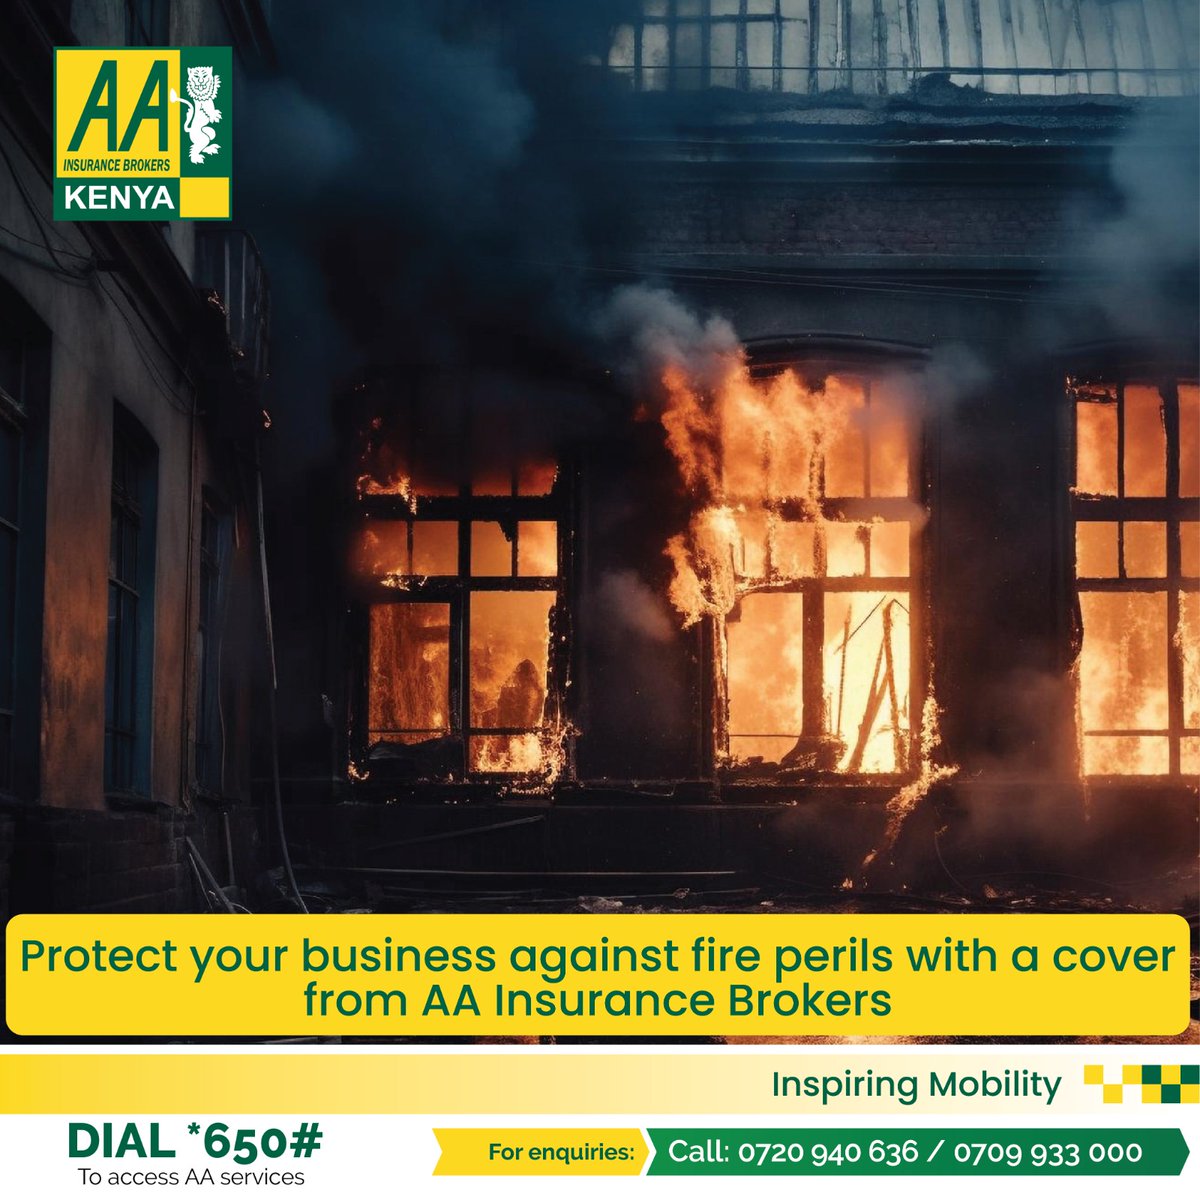 Have you insured your business against fire? AA Insurance Brokers industrial fire policy helps ensure your buildings, machinery, furniture, equipment, and stock in trade are covered. Request a free quote, call us on 0720940636/0709933000
#AAIBCares